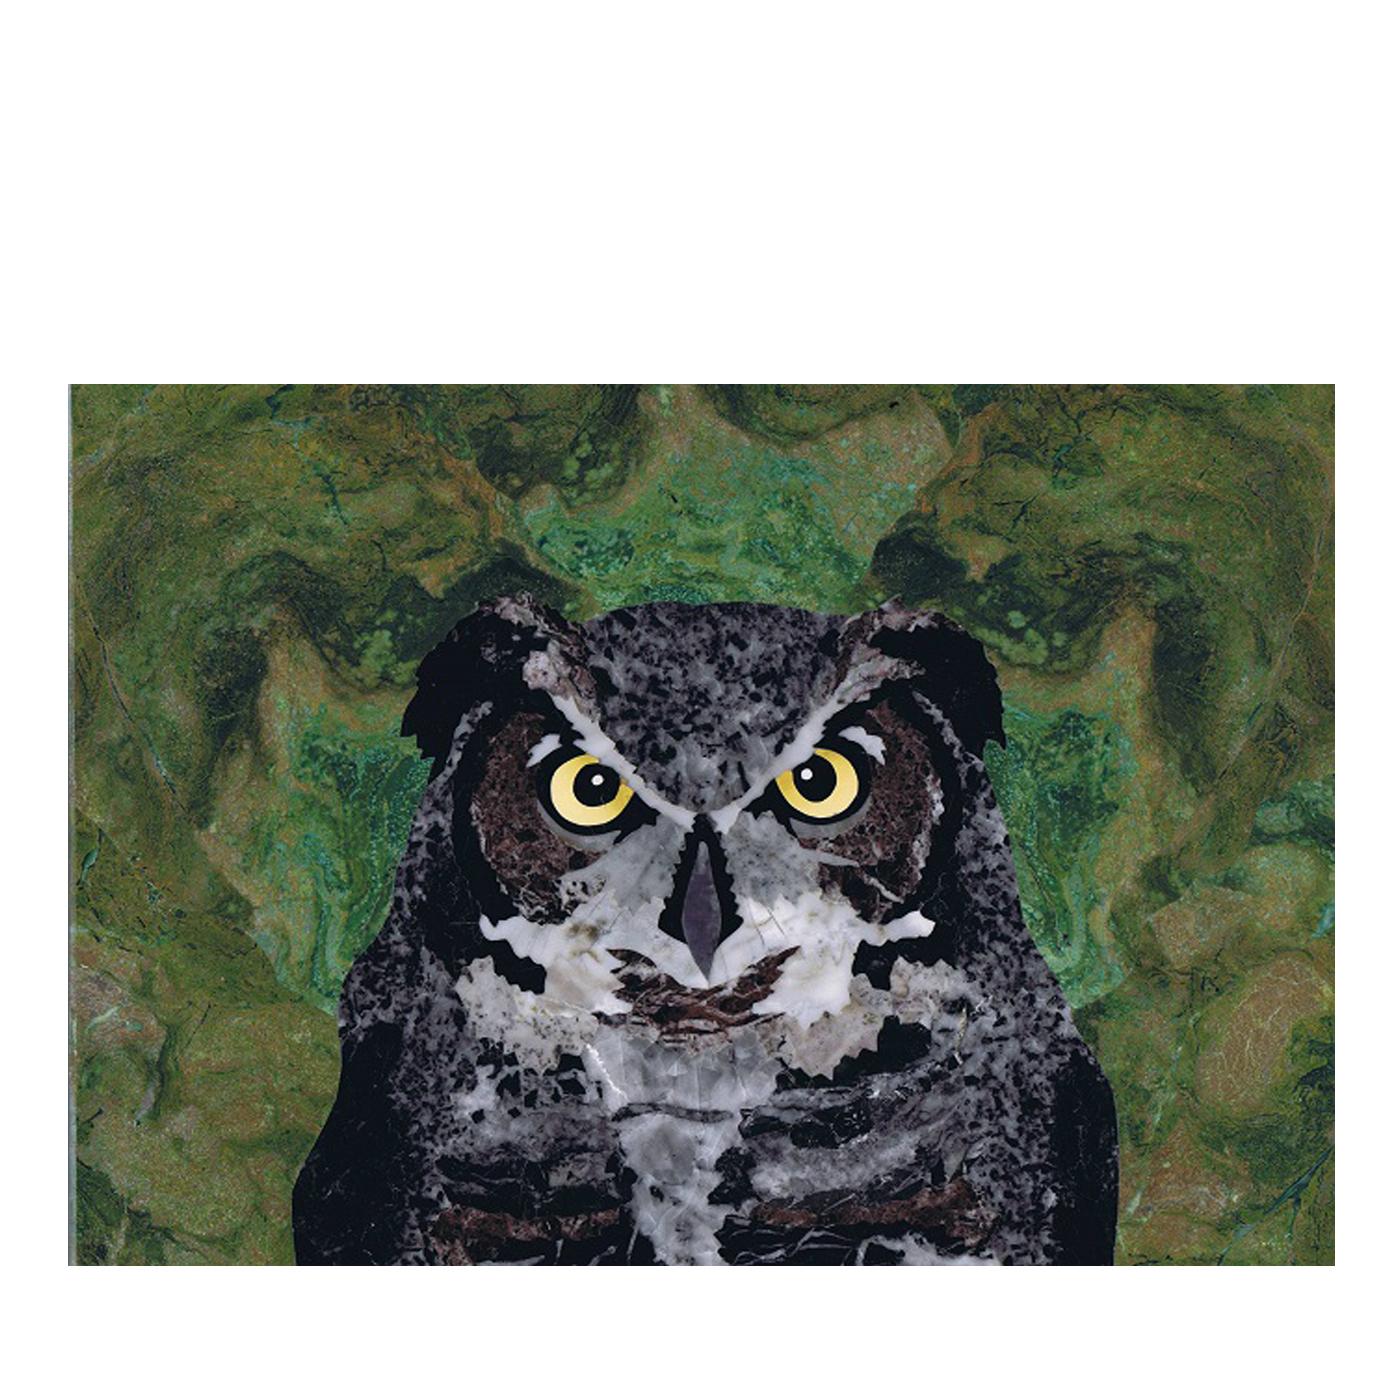 This exquisite Pietra Dura mosaic portraying an owl is sure to captivate attention and impress. Created using high-quality precious and semi-precious stones, it shows an impressive array of grey, black, and green hues that masterfully capture each